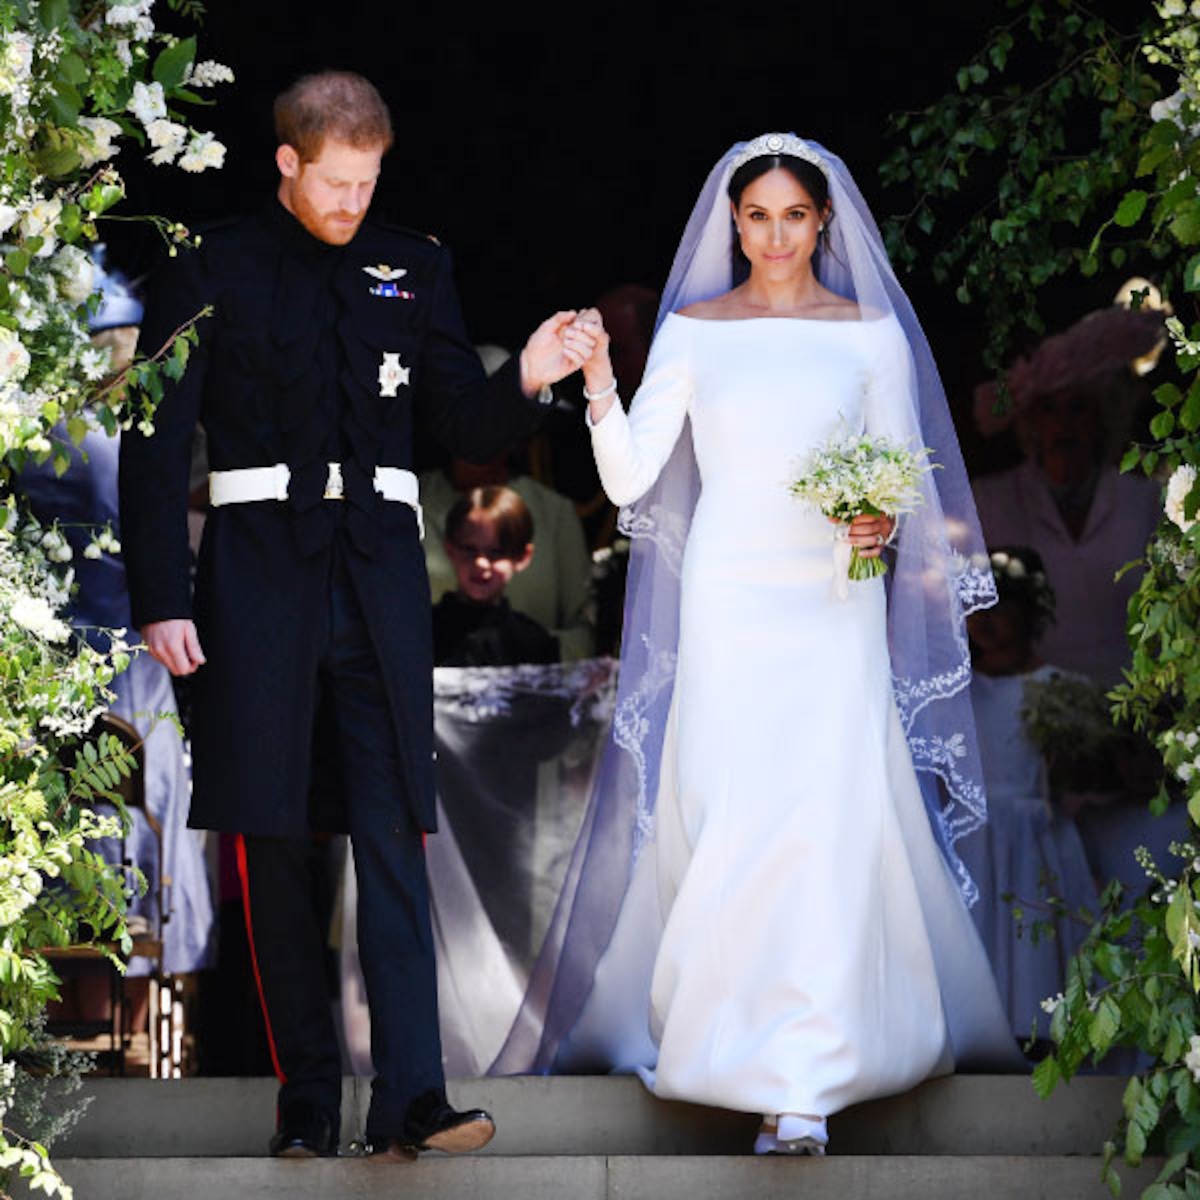 10 Surprising Stats About Prince Harry & Meghan Markle's Wedding - E! Online